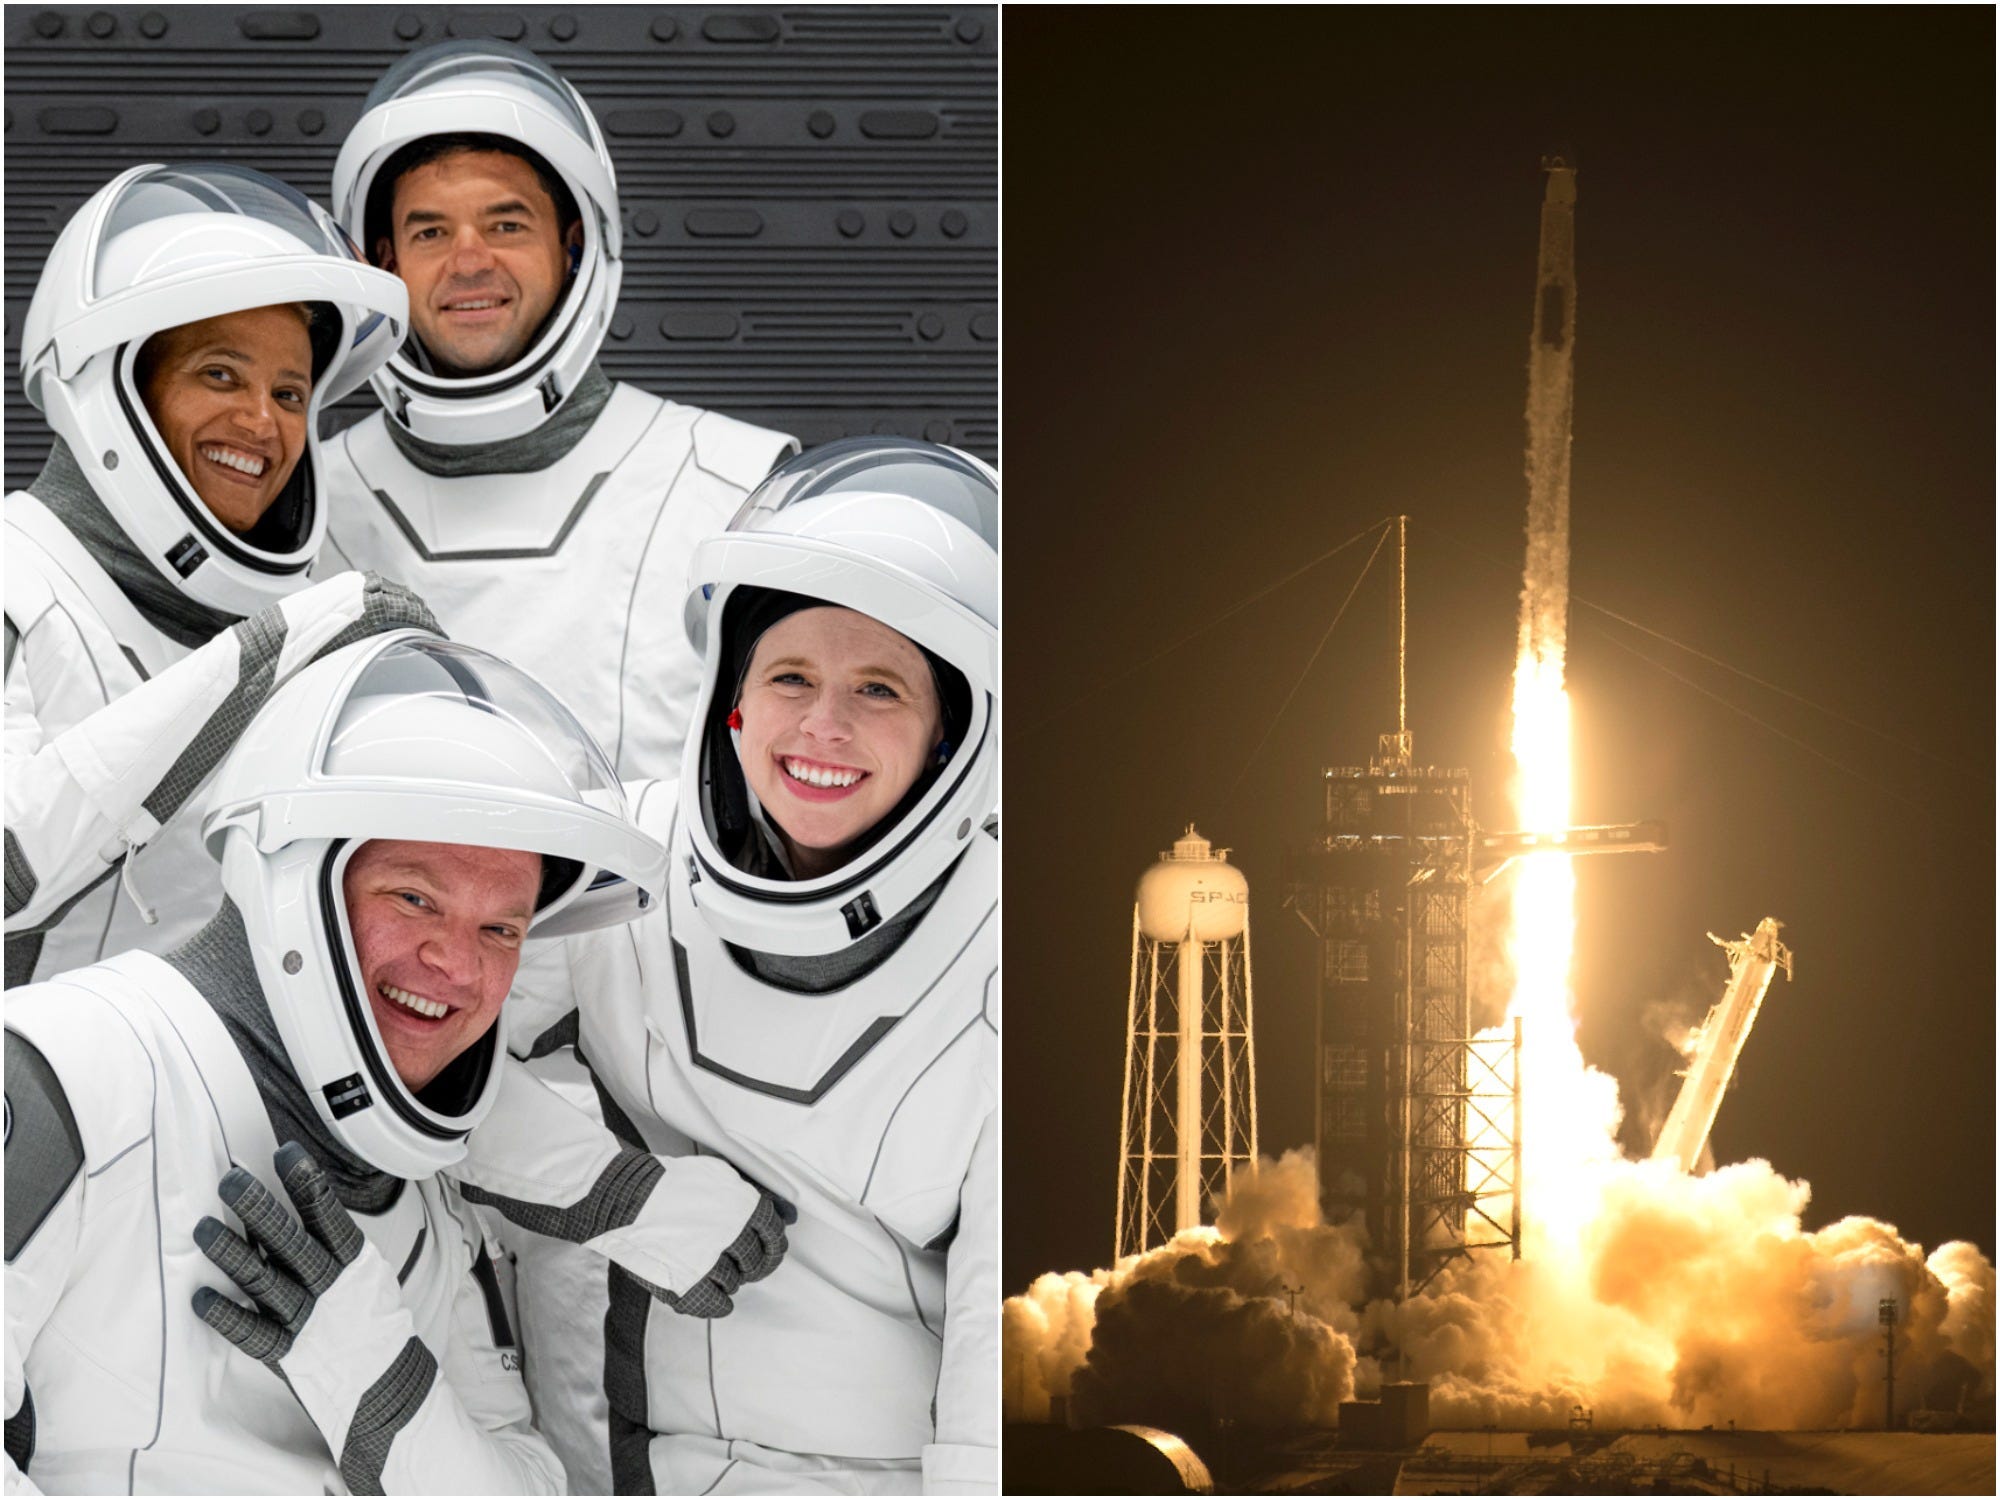 inspiration4 crew members pose in spacesuits in front of grey wall side-by-side image with falcon 9 rocket launches at night